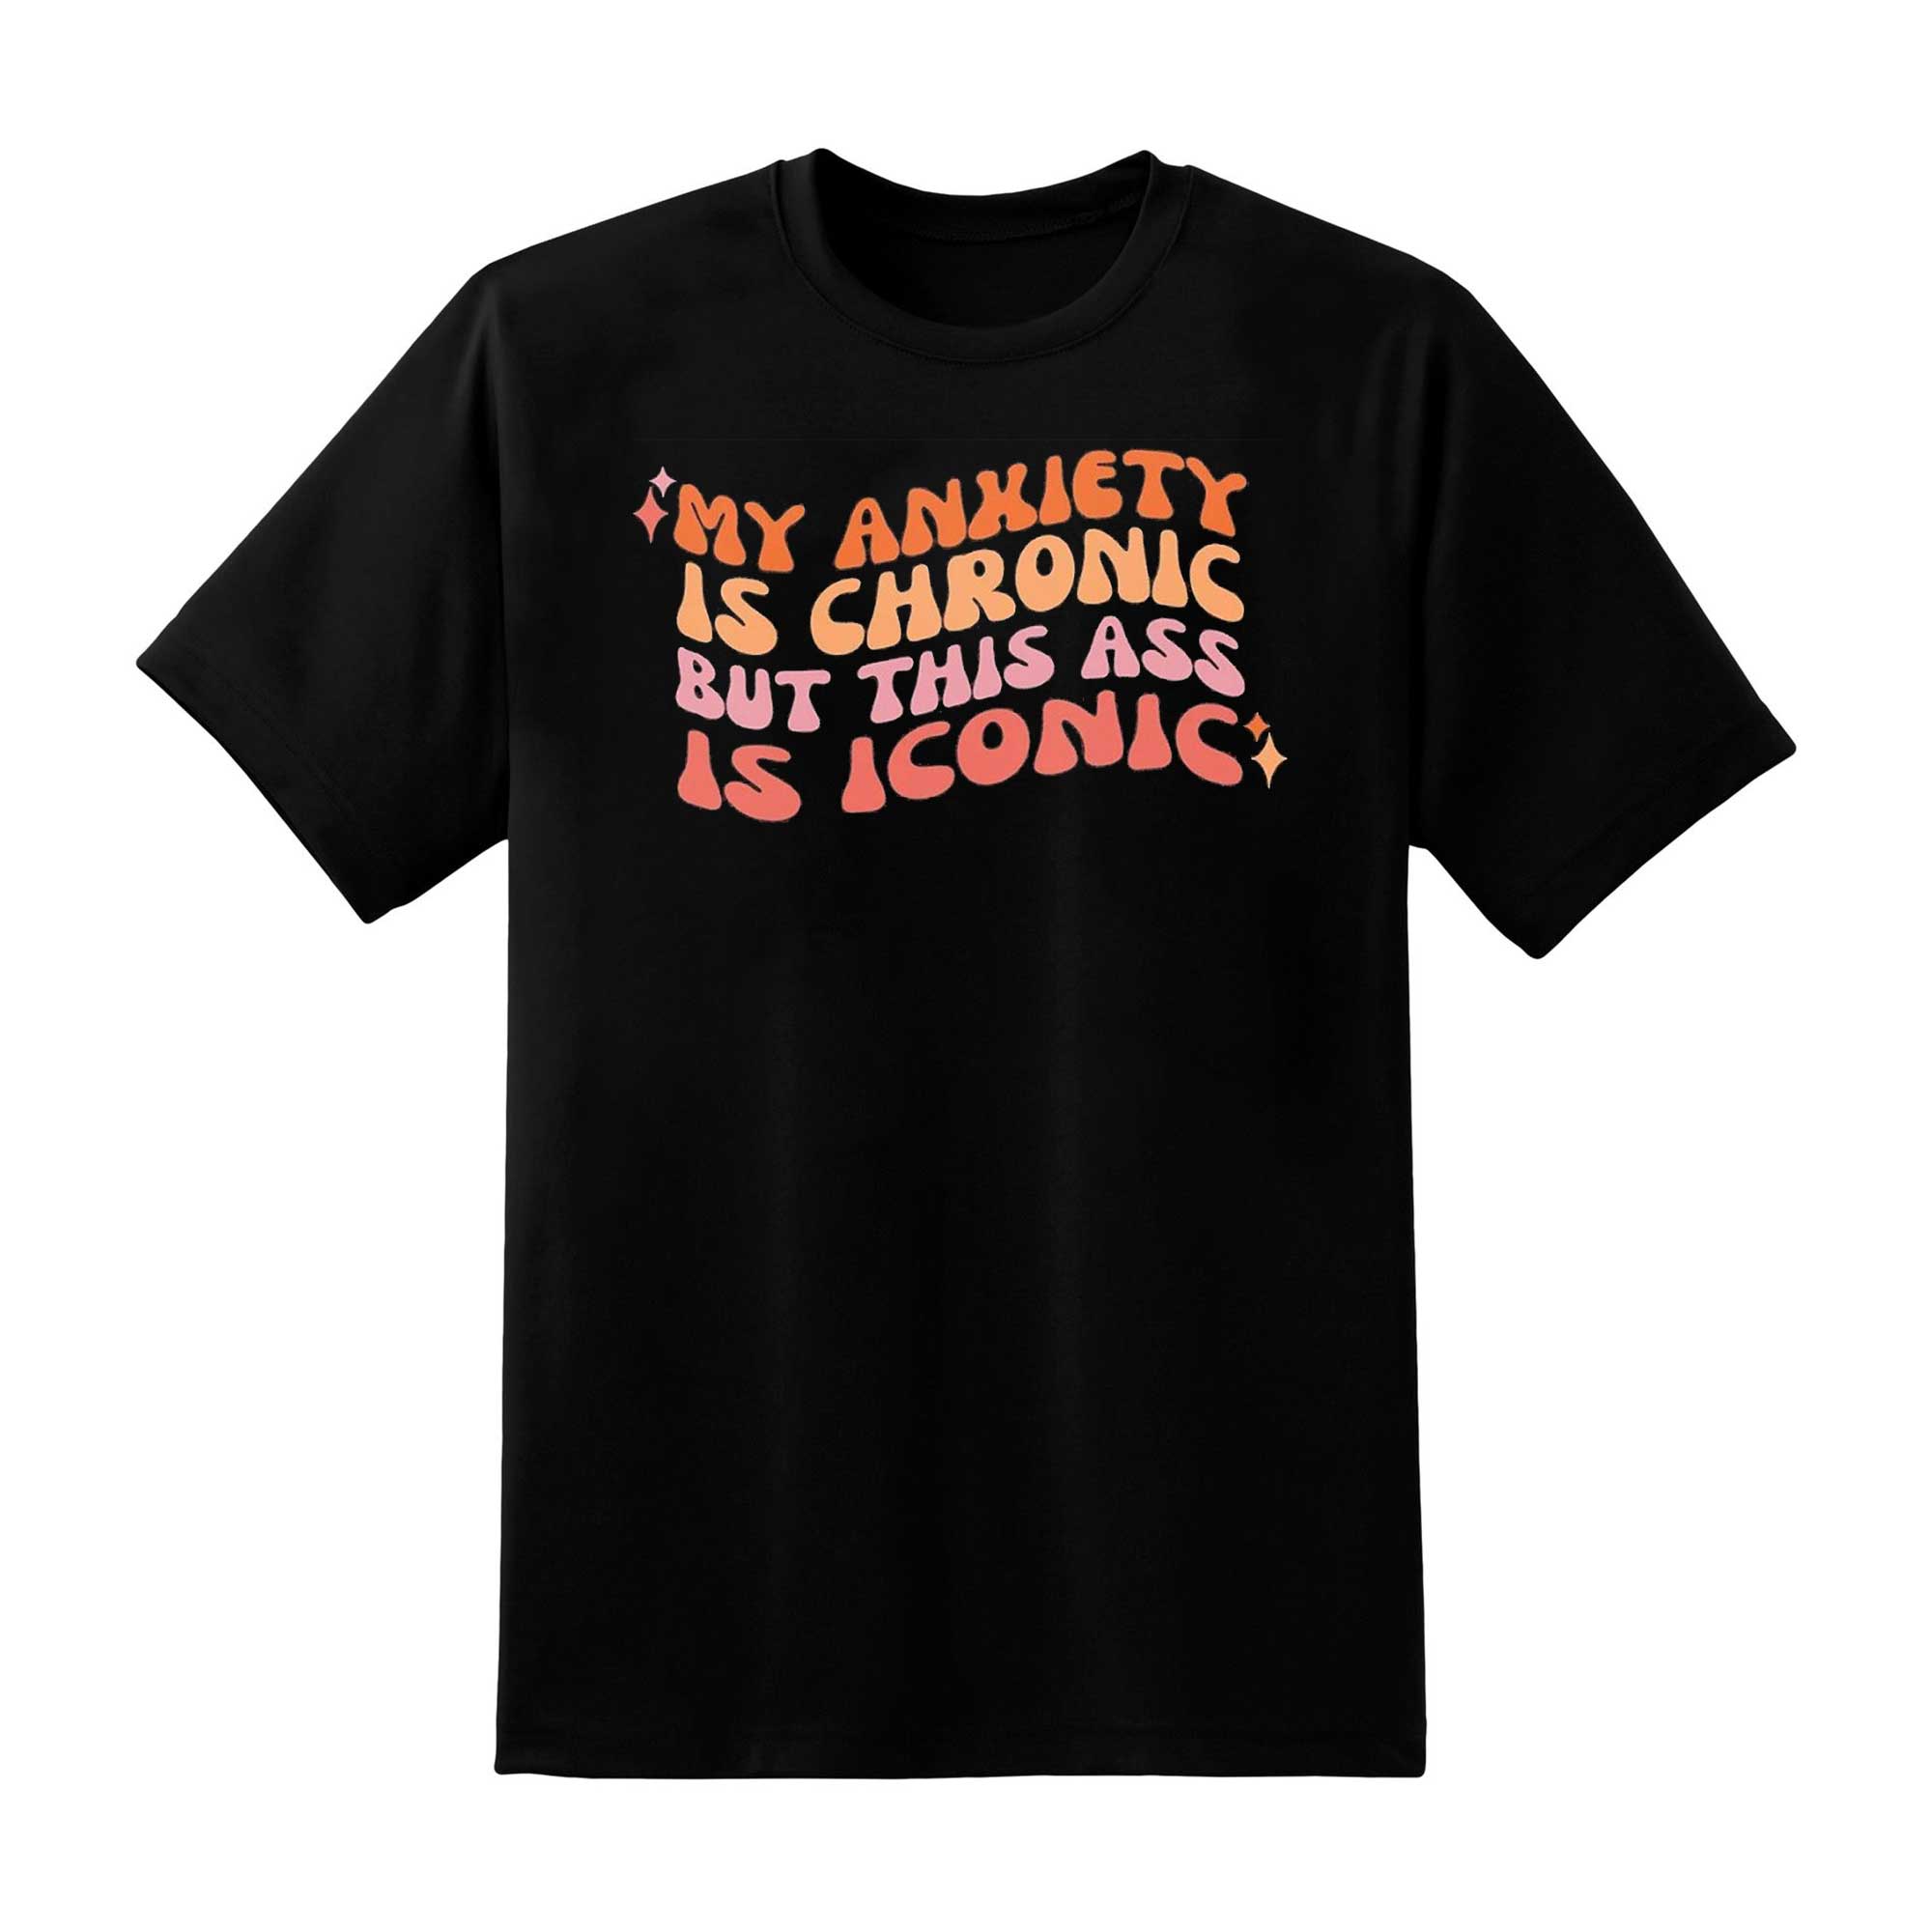 Skitongift My Anxiety Is Chronic But This Ass Is Iconic Shirt Neurodiversity Shirt Funny Shirt Inclusion Shirt